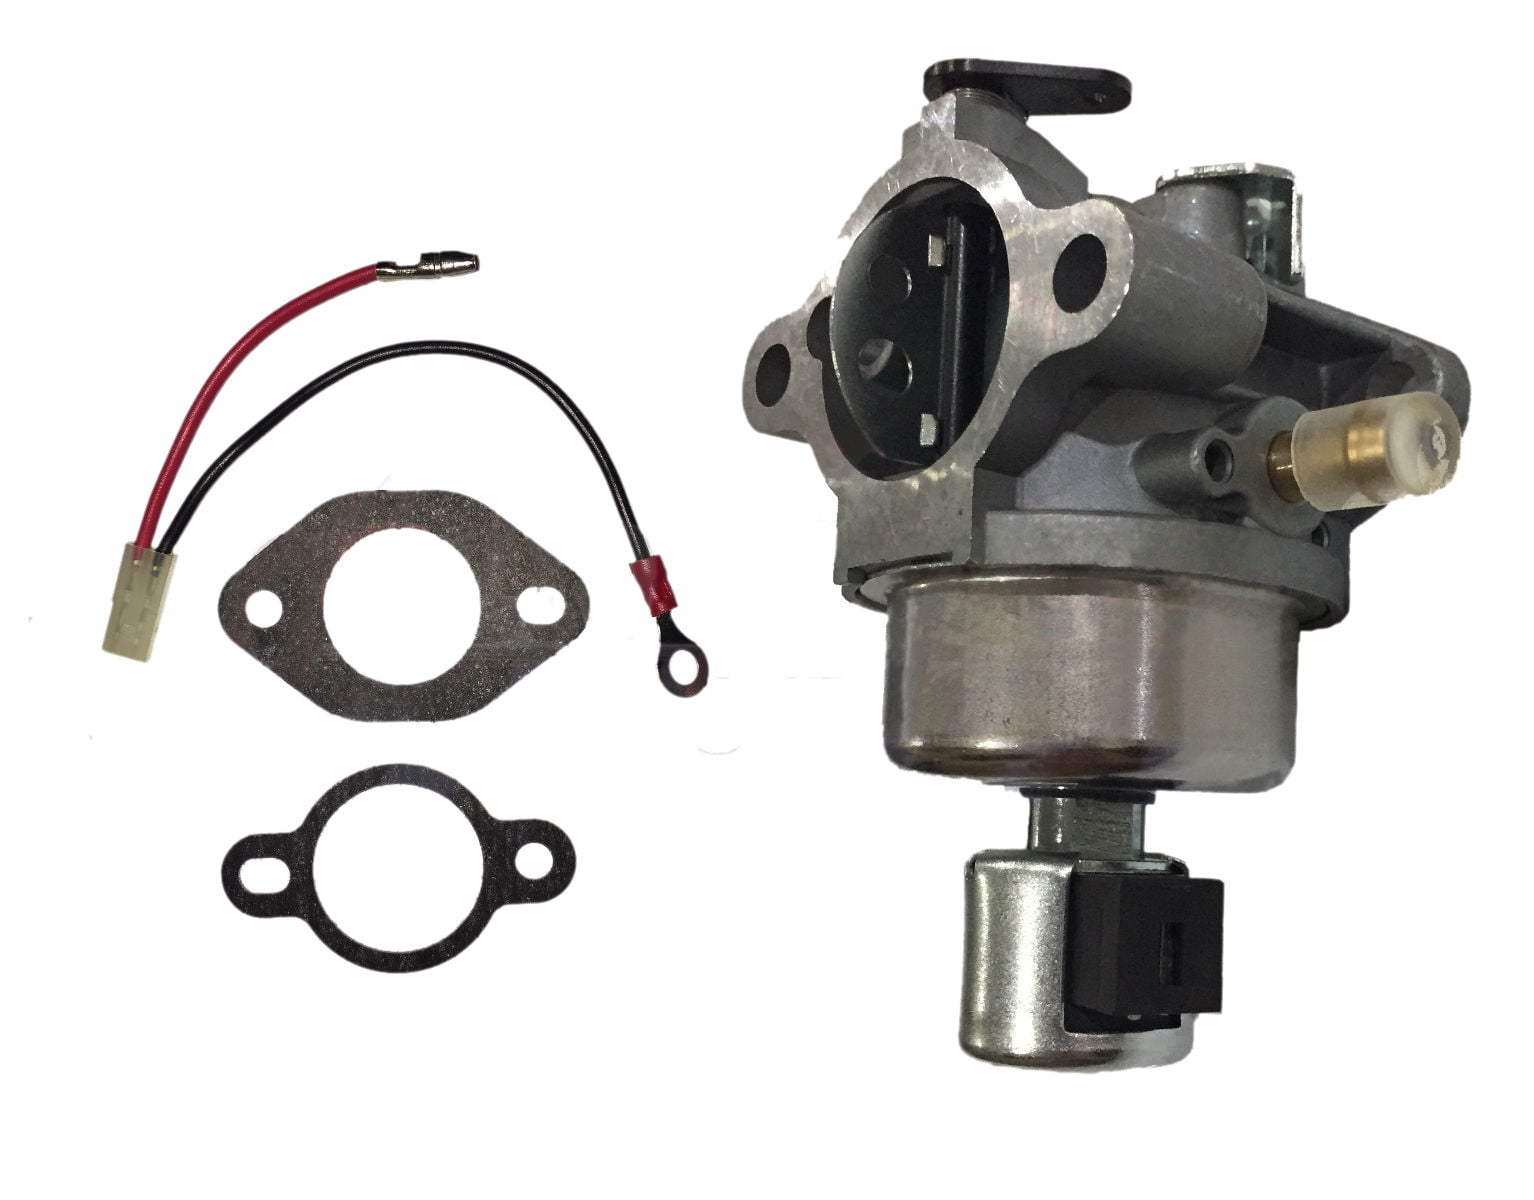 Anngo Replace 20-853-33-S Carburetor Carb Replacement for Kohler Courage SV Series SV590-3230 SV591-3217 SV600 20 853 8-S/20 853 01-S/20 853 02-S/20 853 14-S/20 853 16-S/20 853 